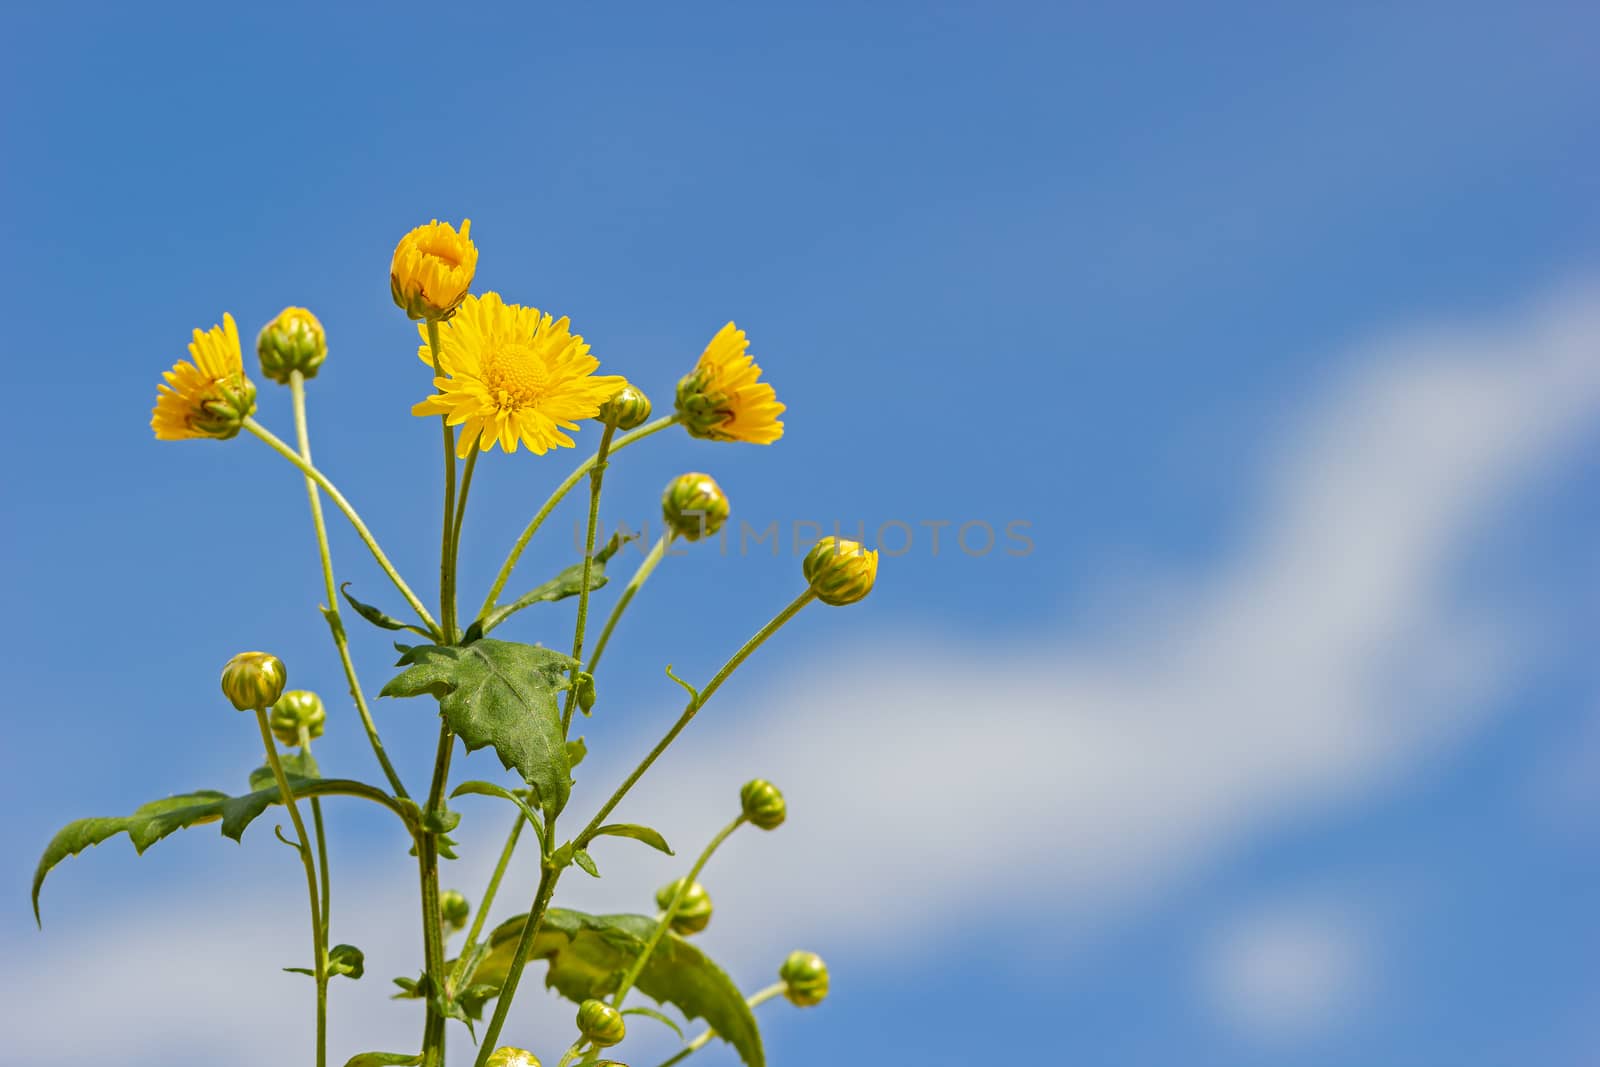 Yellow chrysanthemum in the white clouds and blue sky background.